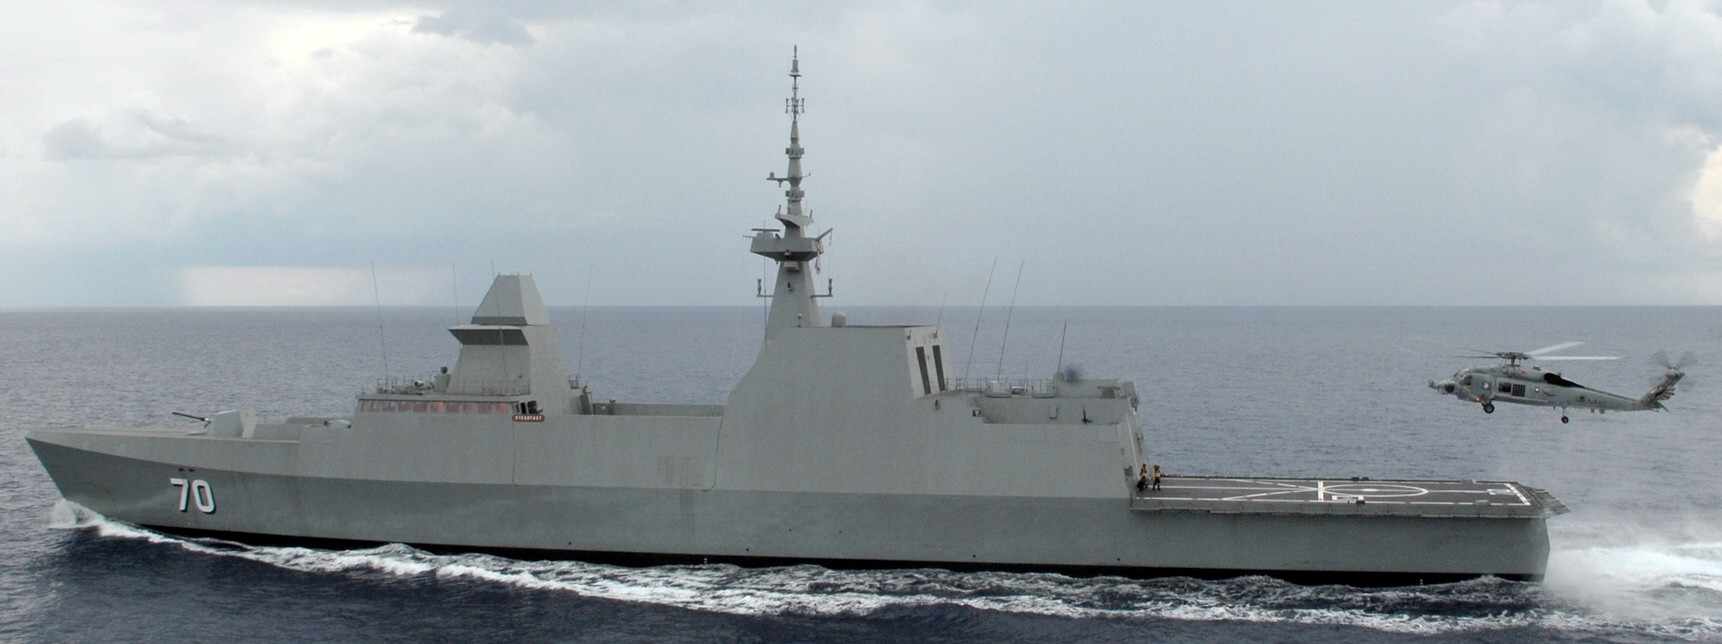 70 rss steadfast formidable class multi-mission missile frigate ffg republic singapore navy 09